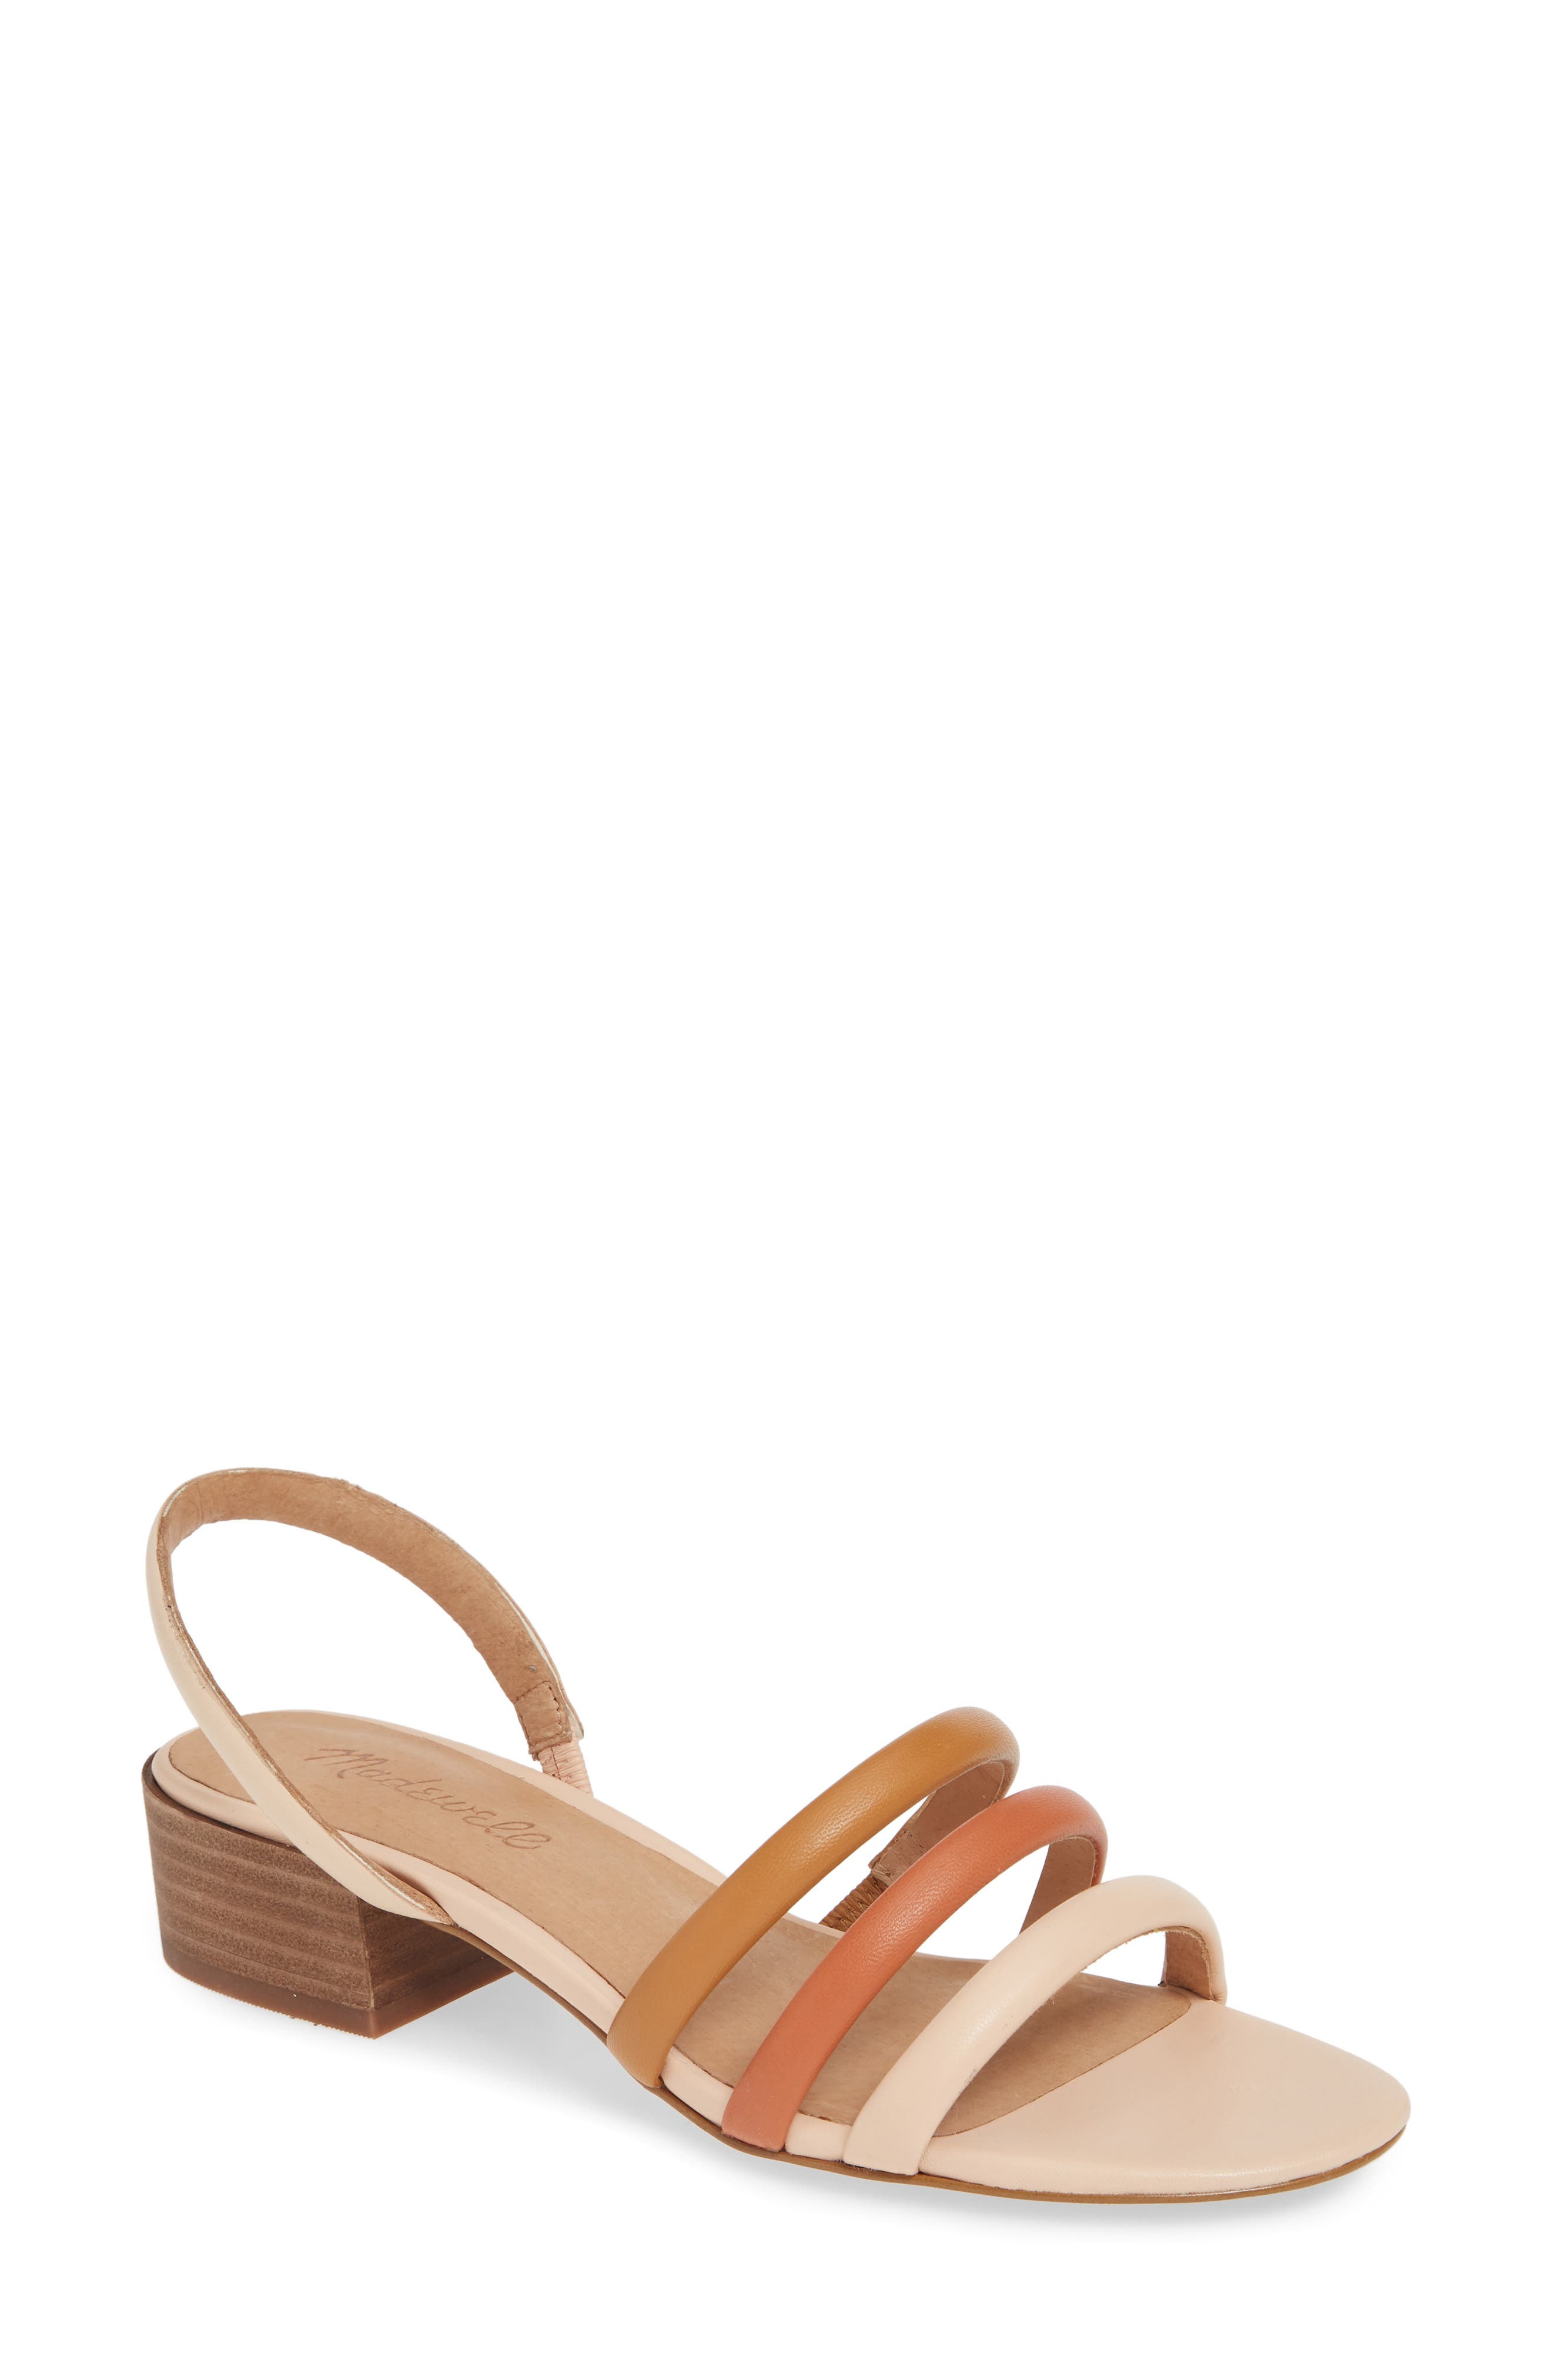 the addie slingback sandal in leather